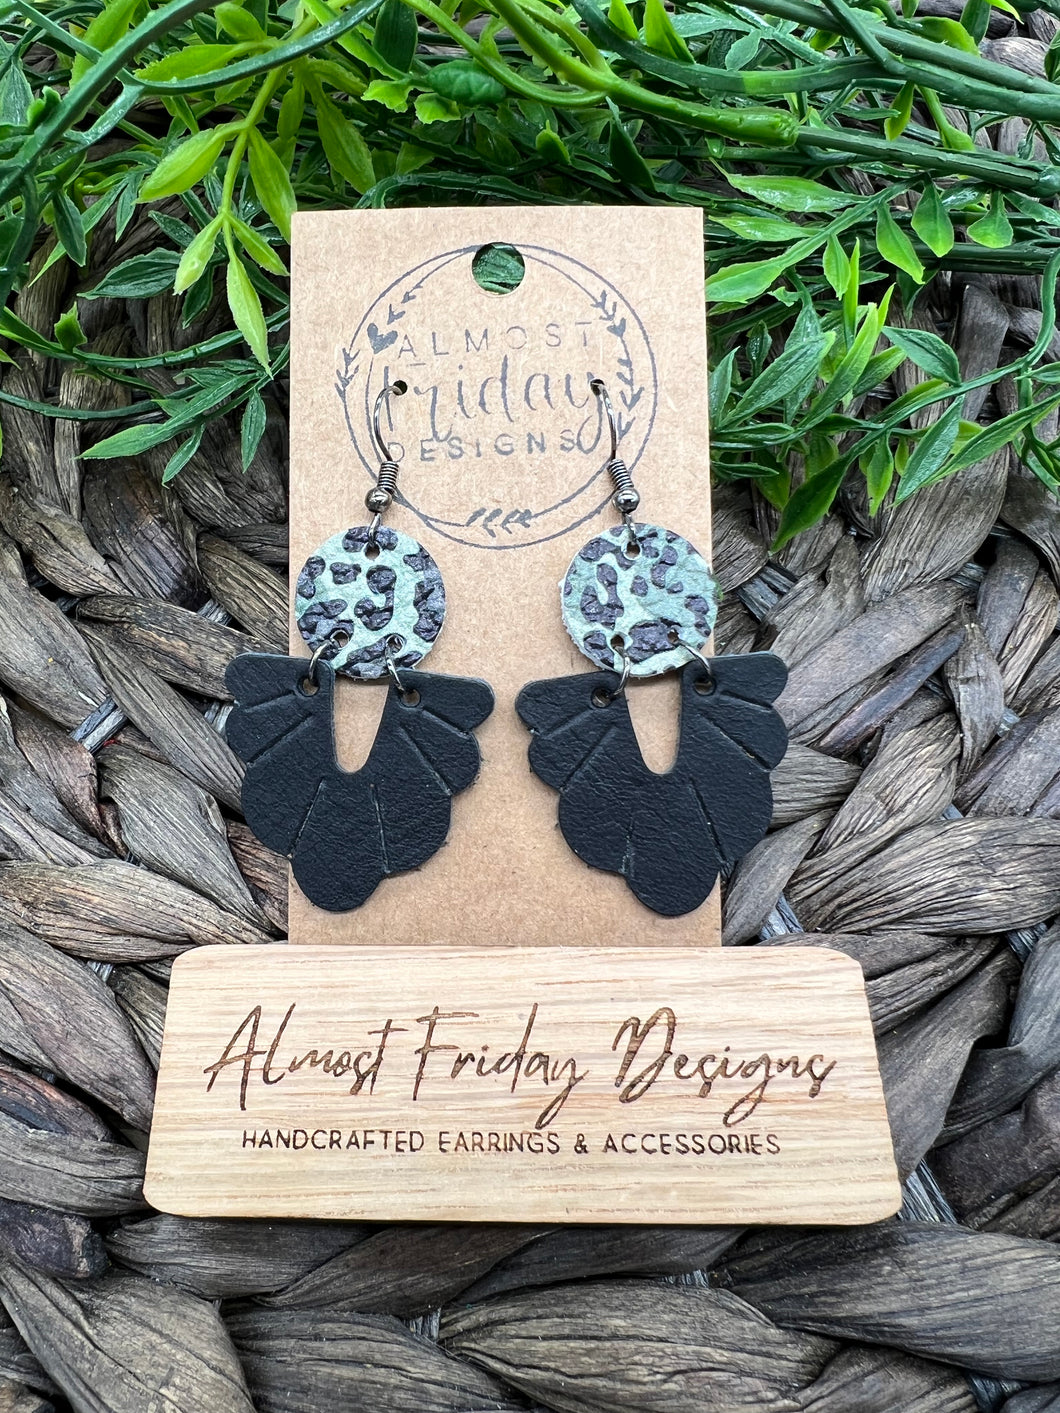 Genuine Leather Earrings - Camo - Camouflage - Arch - Rainbow - Scalloped - Embossed - Leopard Print - Animal Print - Green - Black - Statement Earrings - Dangles